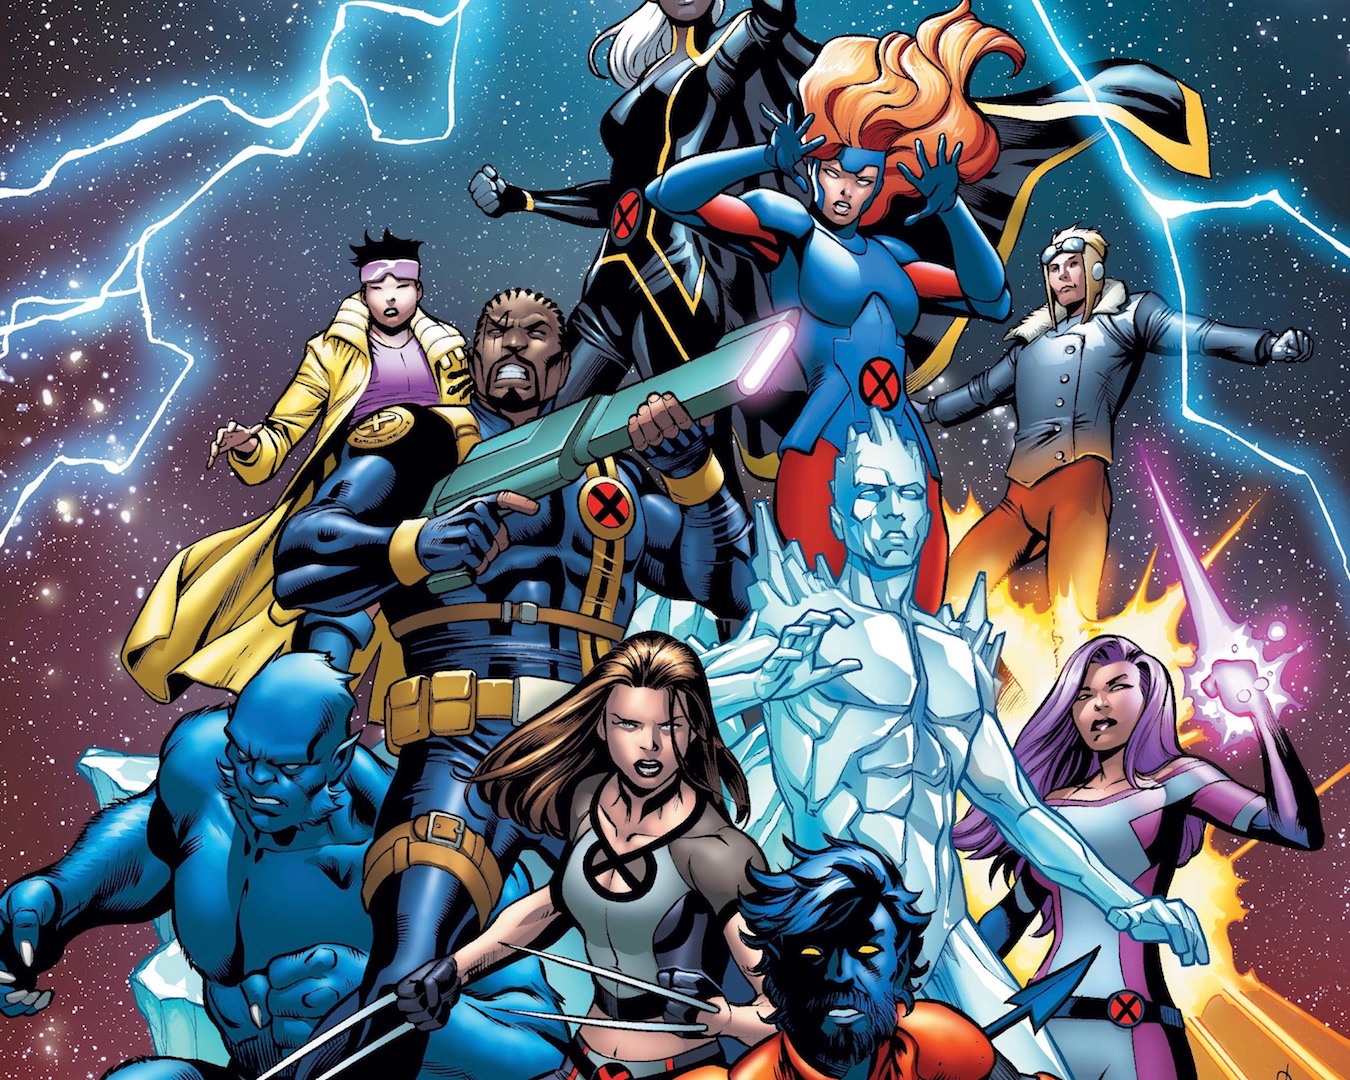 '2019 is gonna change everything for the X-Men' - An interview with X-Men Group Editor Jordan D. White